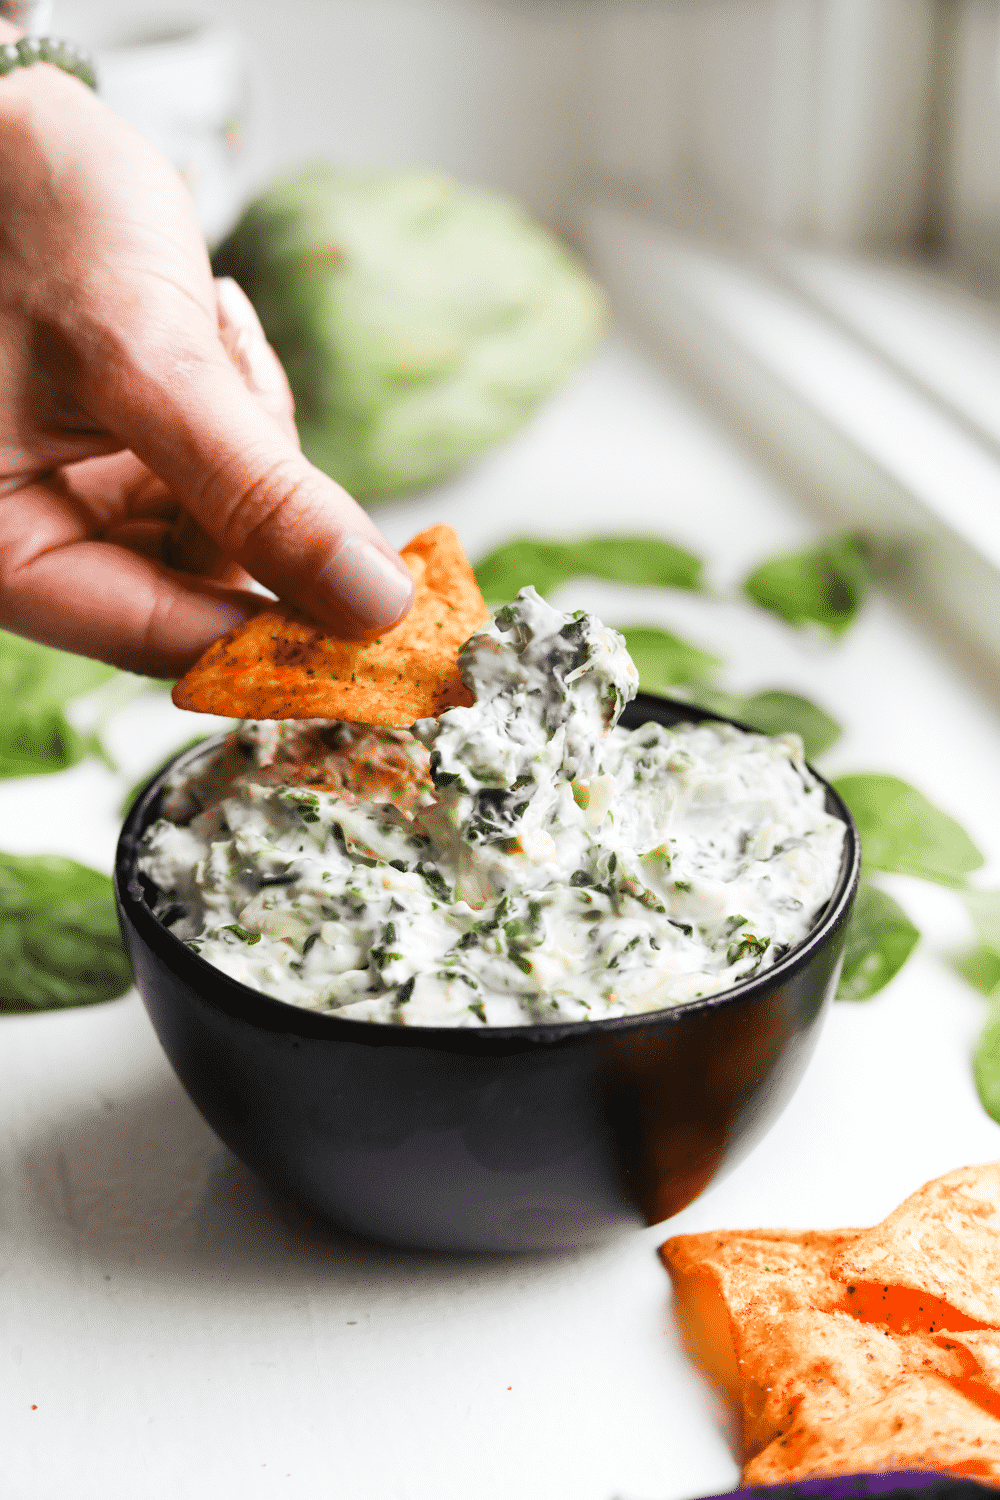 A hand holding a low carb chip with spinach and artichoke dip on it.